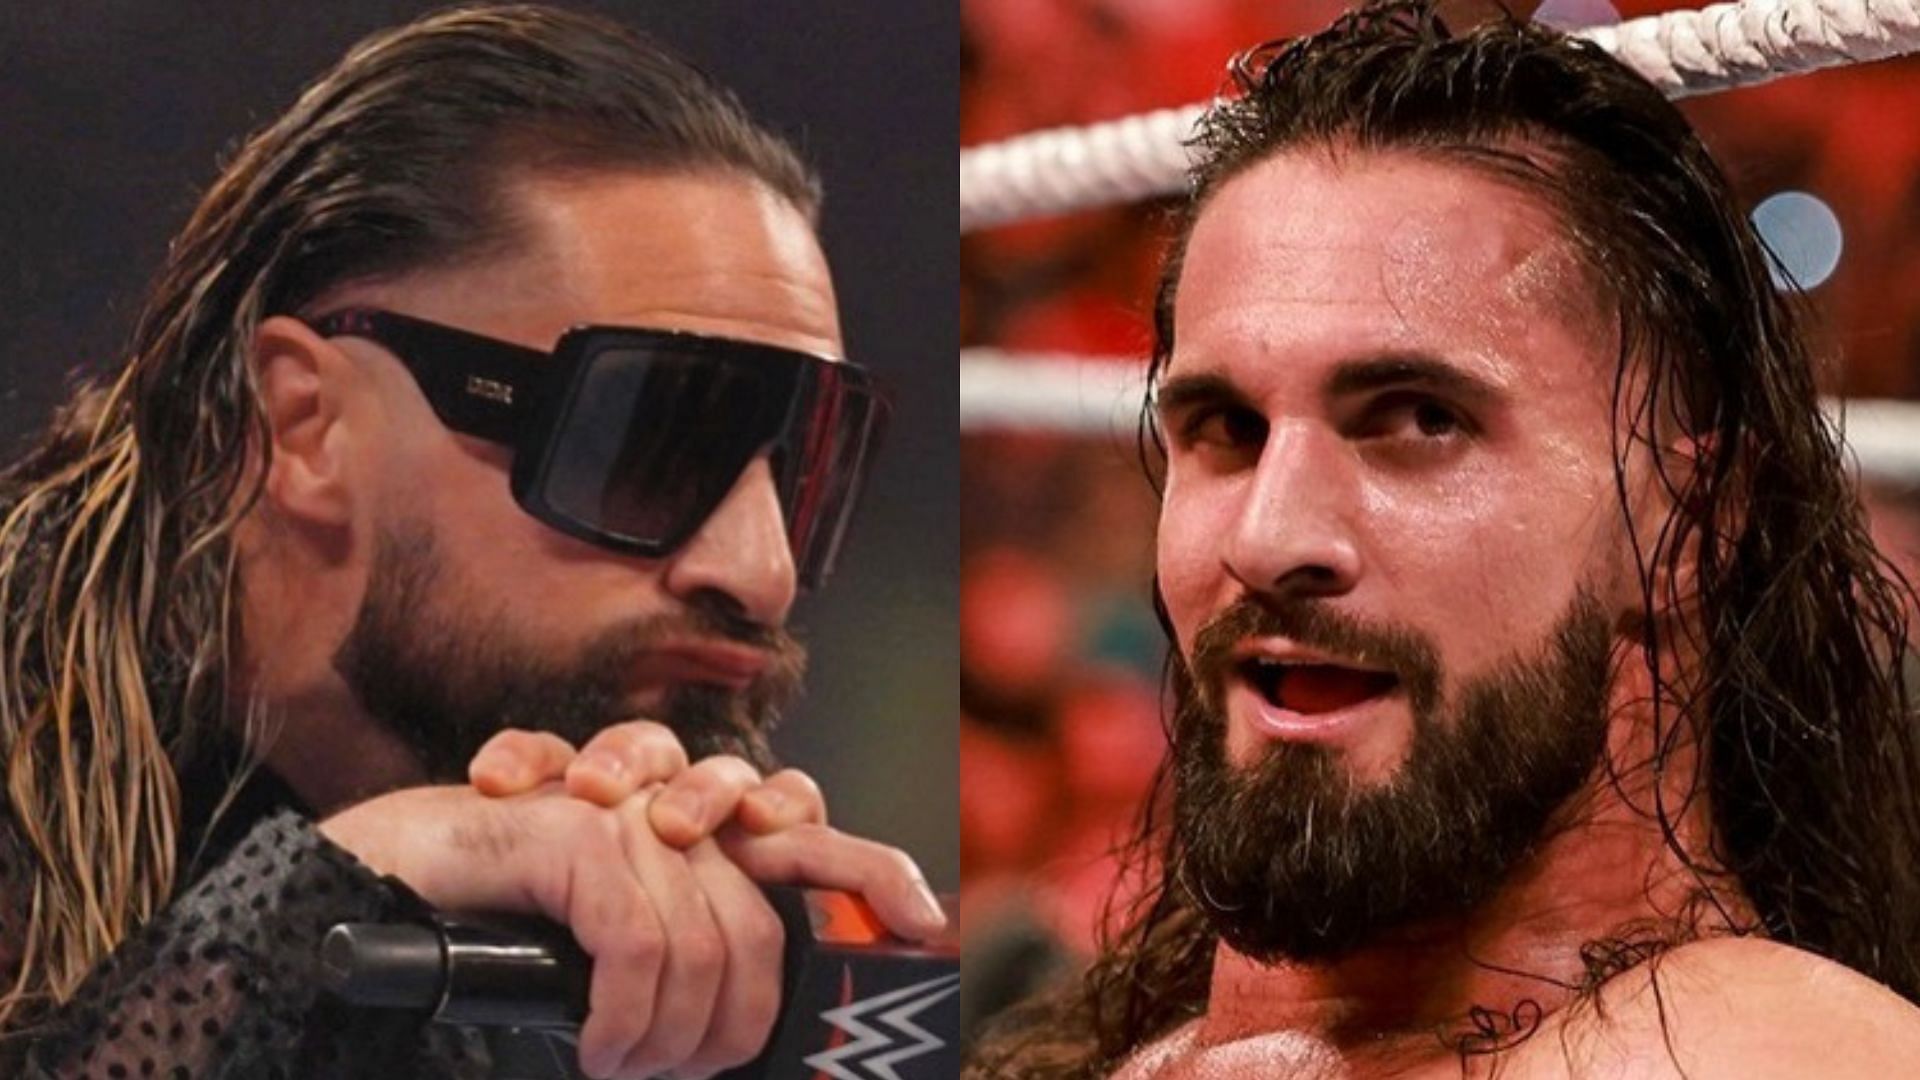 WWE: WWE once turned down 32-year-old's pitch to align with Seth Rollins